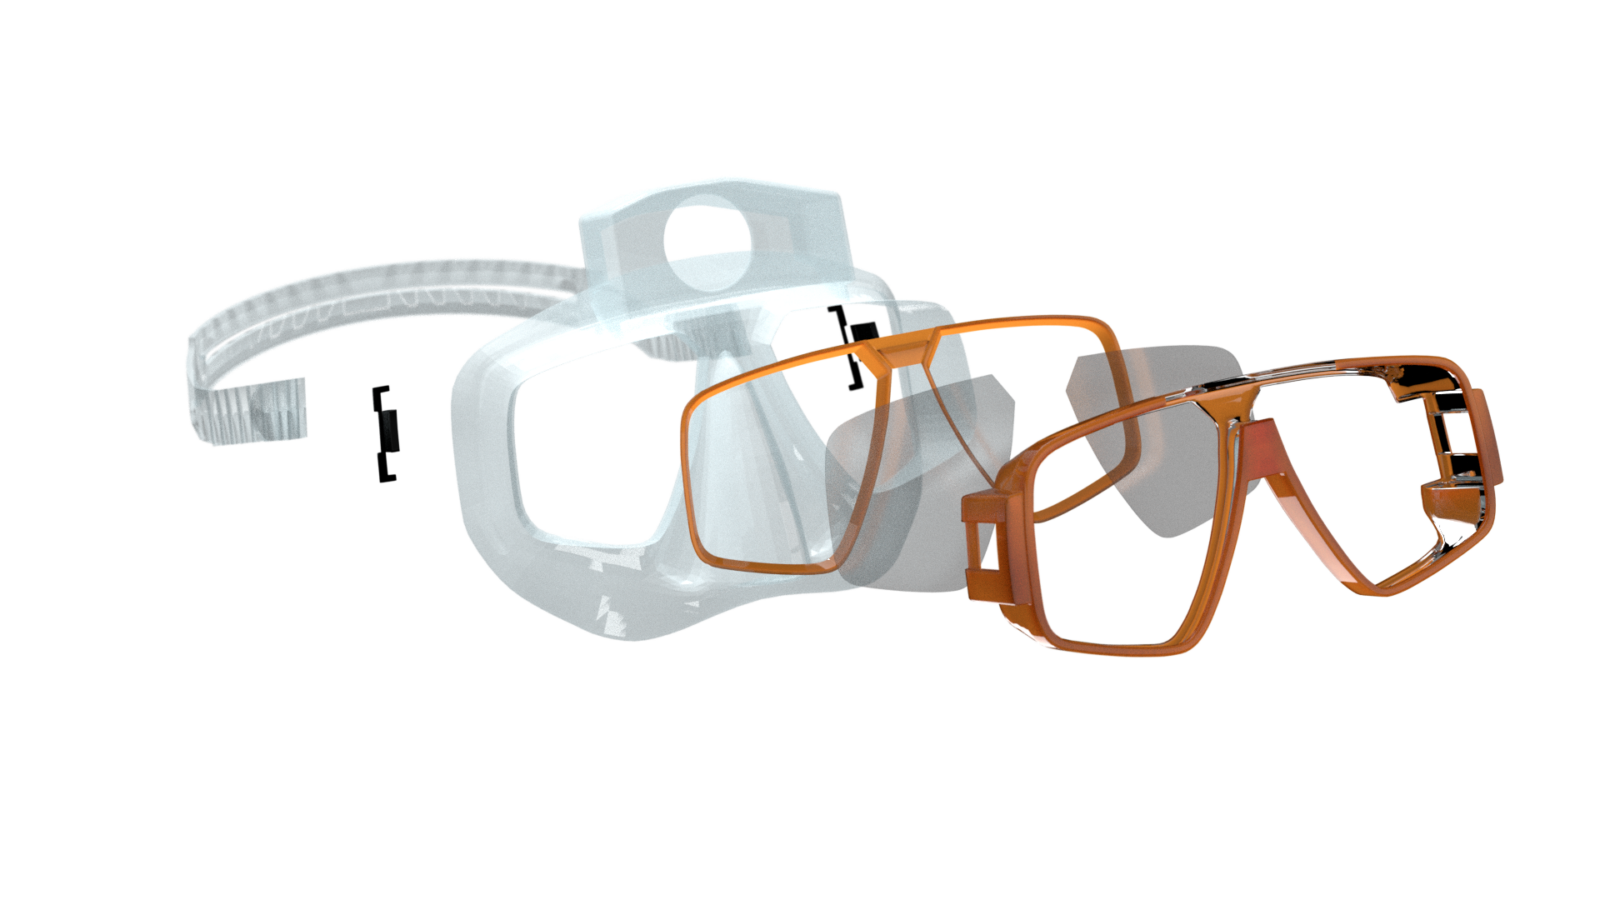 Exploded view of goggle parts. The silicone layer features silicone pocket on top that the camera can slip within